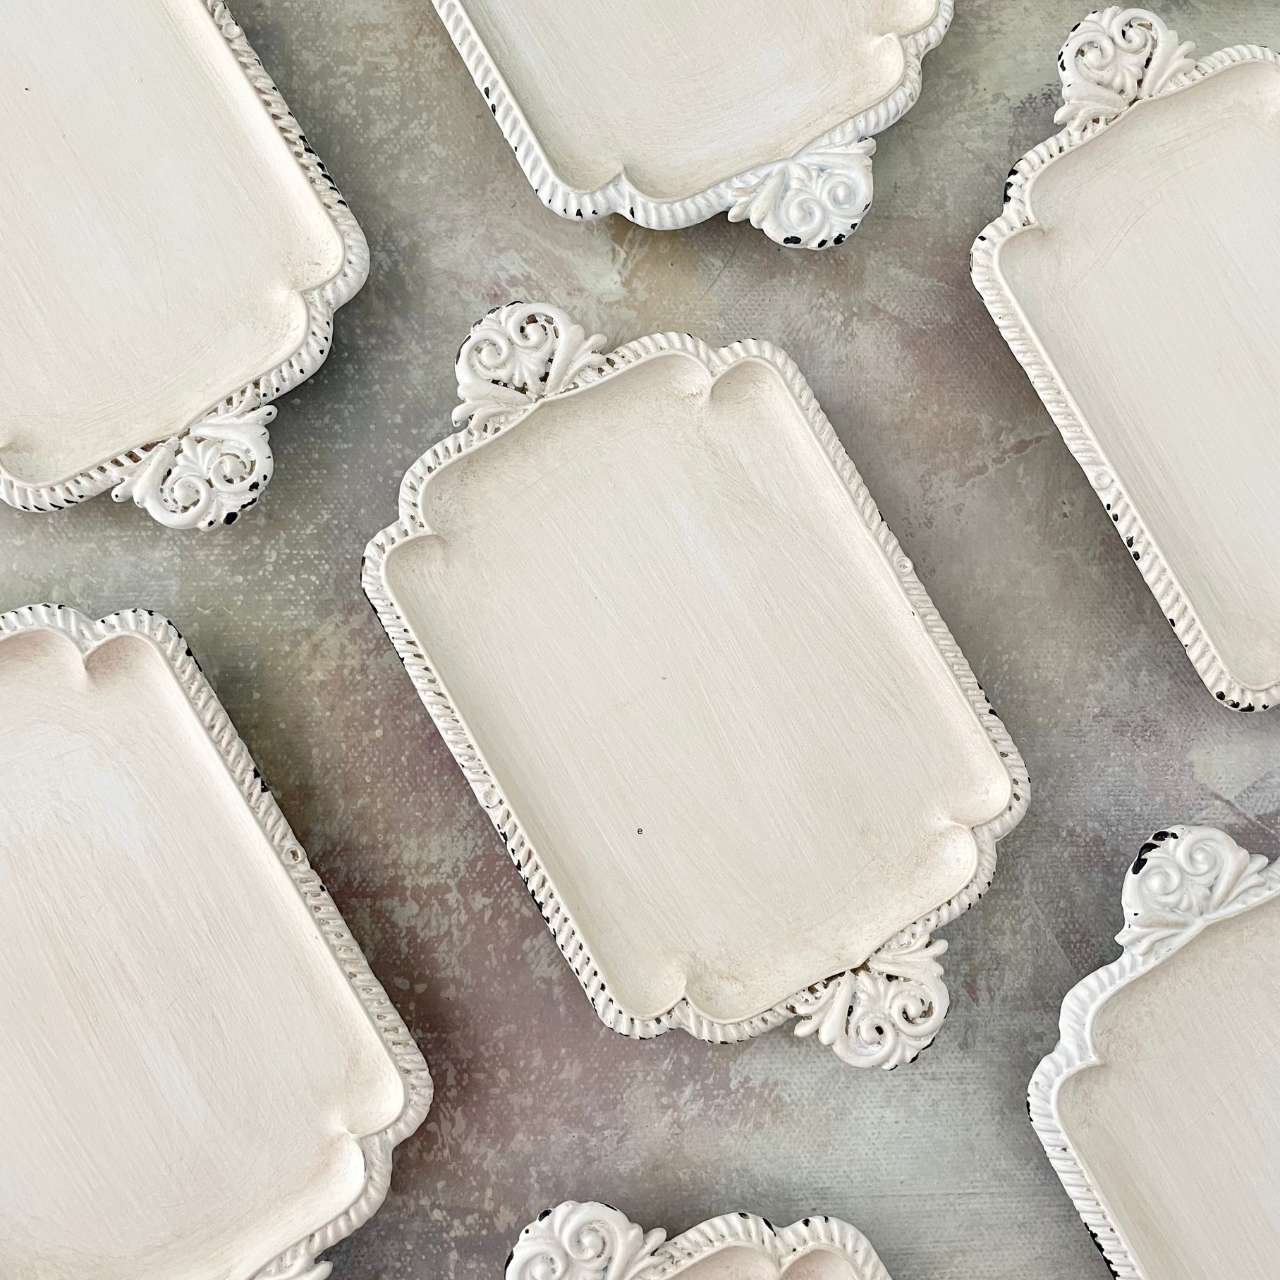 Ivory Small Tray Vintage Inspired